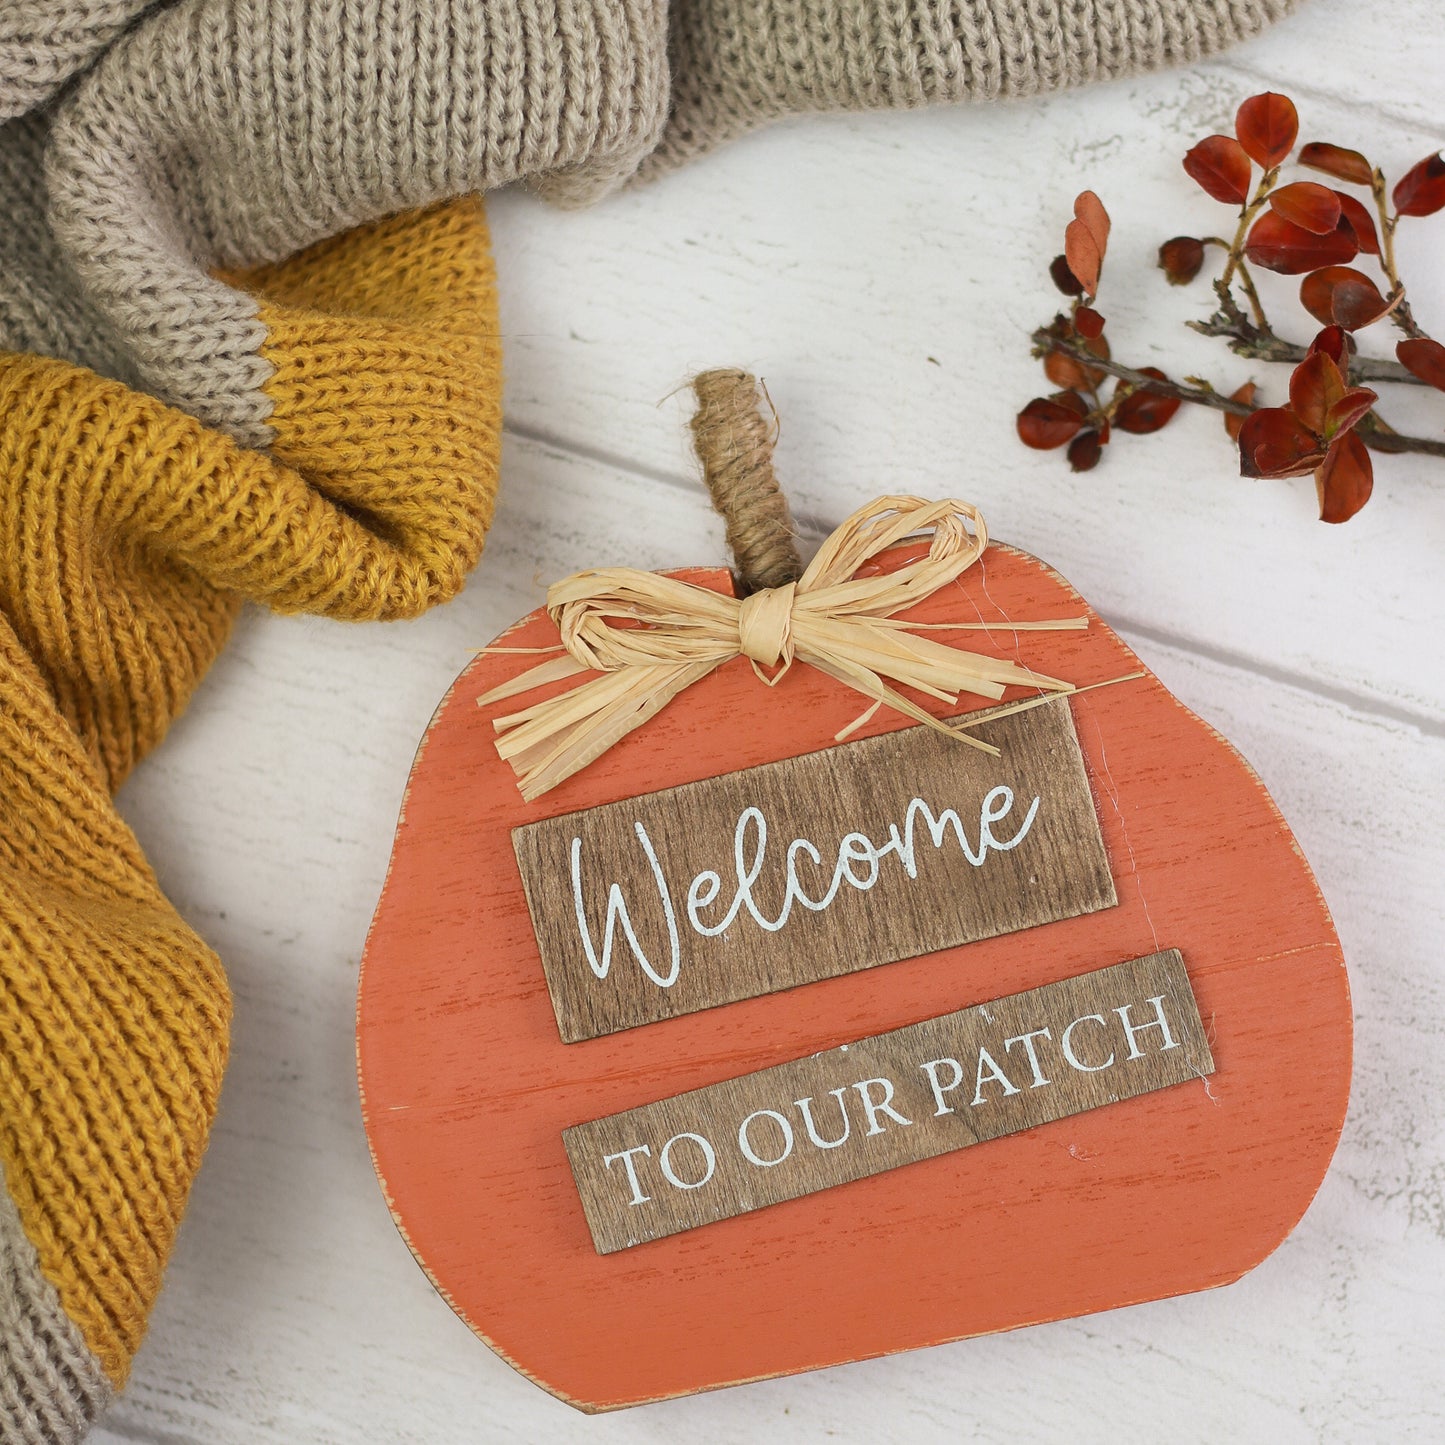 'Welcome to our Patch' Pumpkin